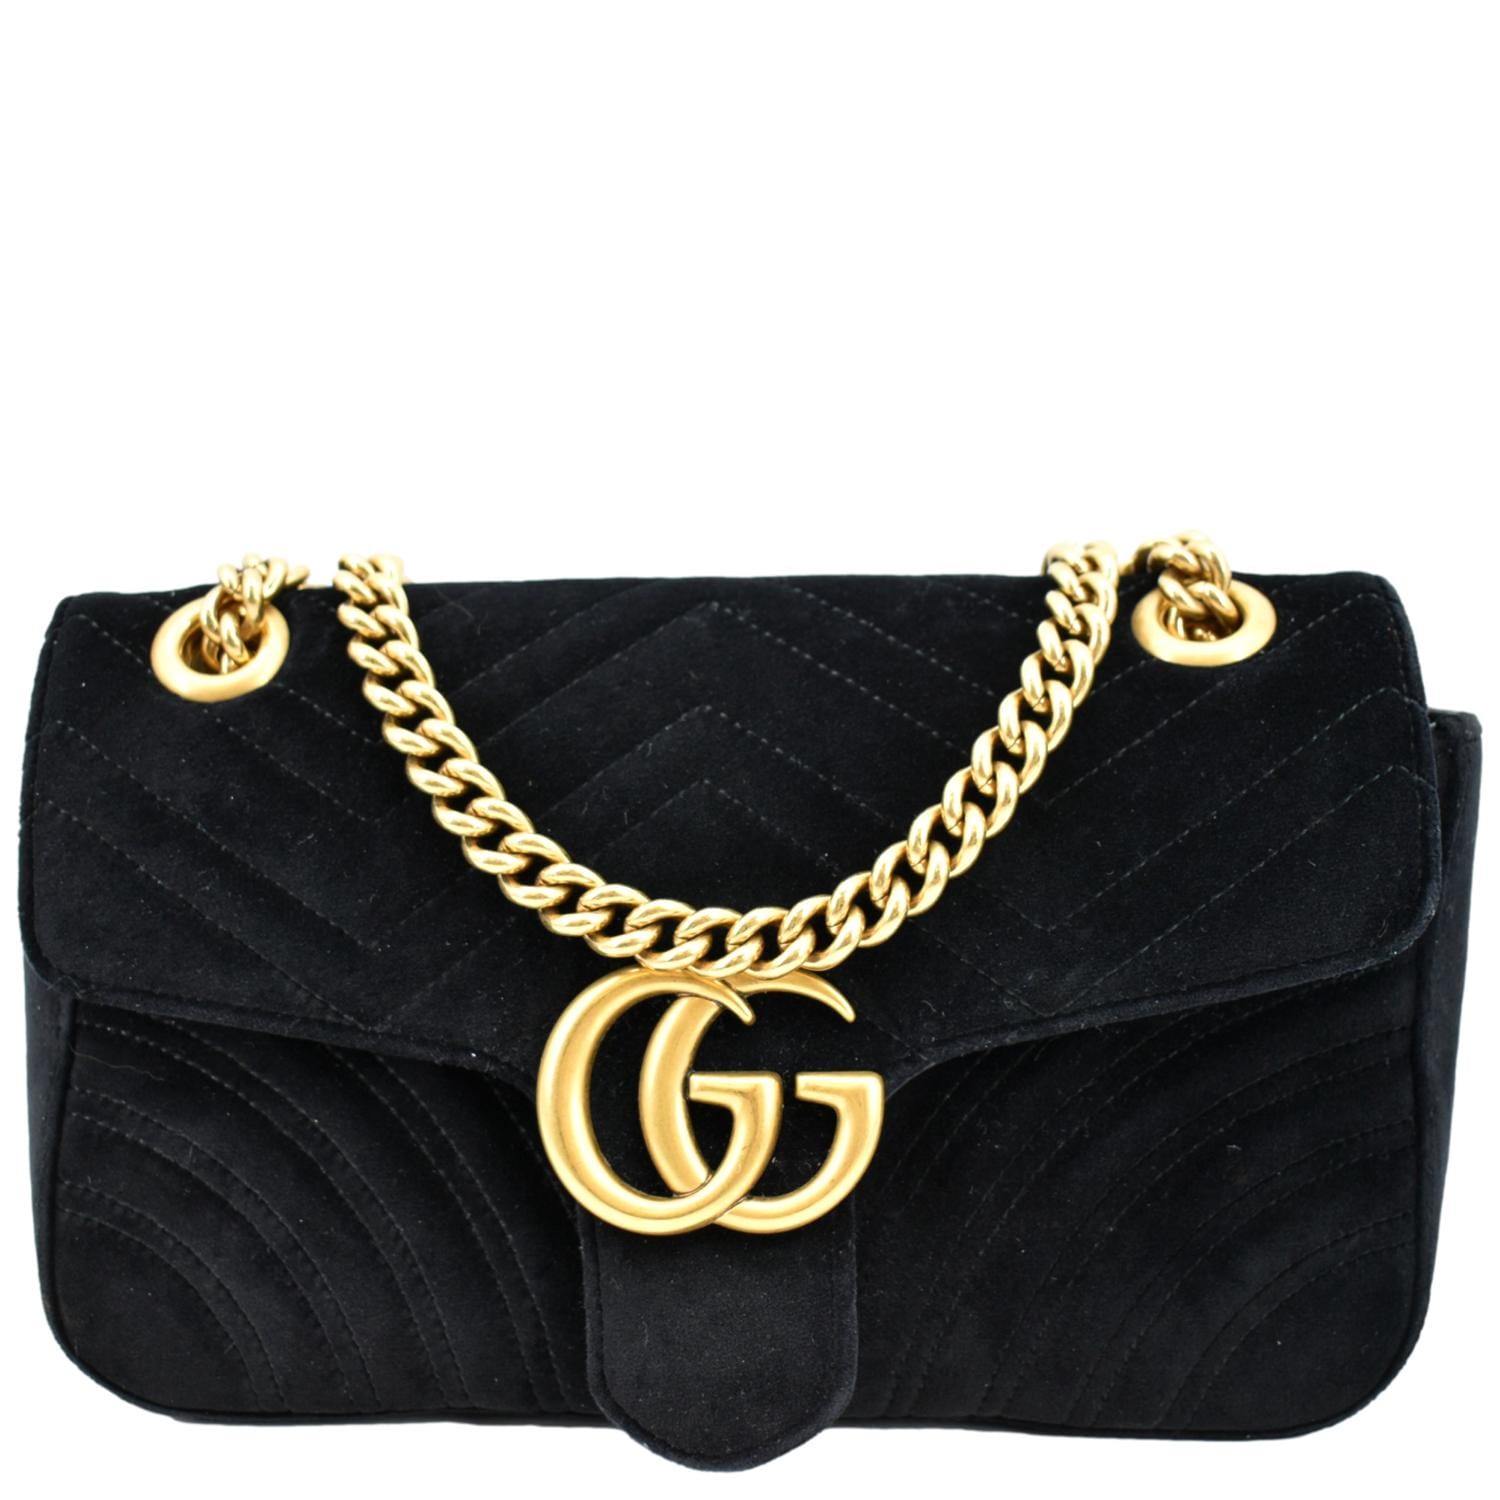 Gucci GG Marmont Crossbody Bag in Color